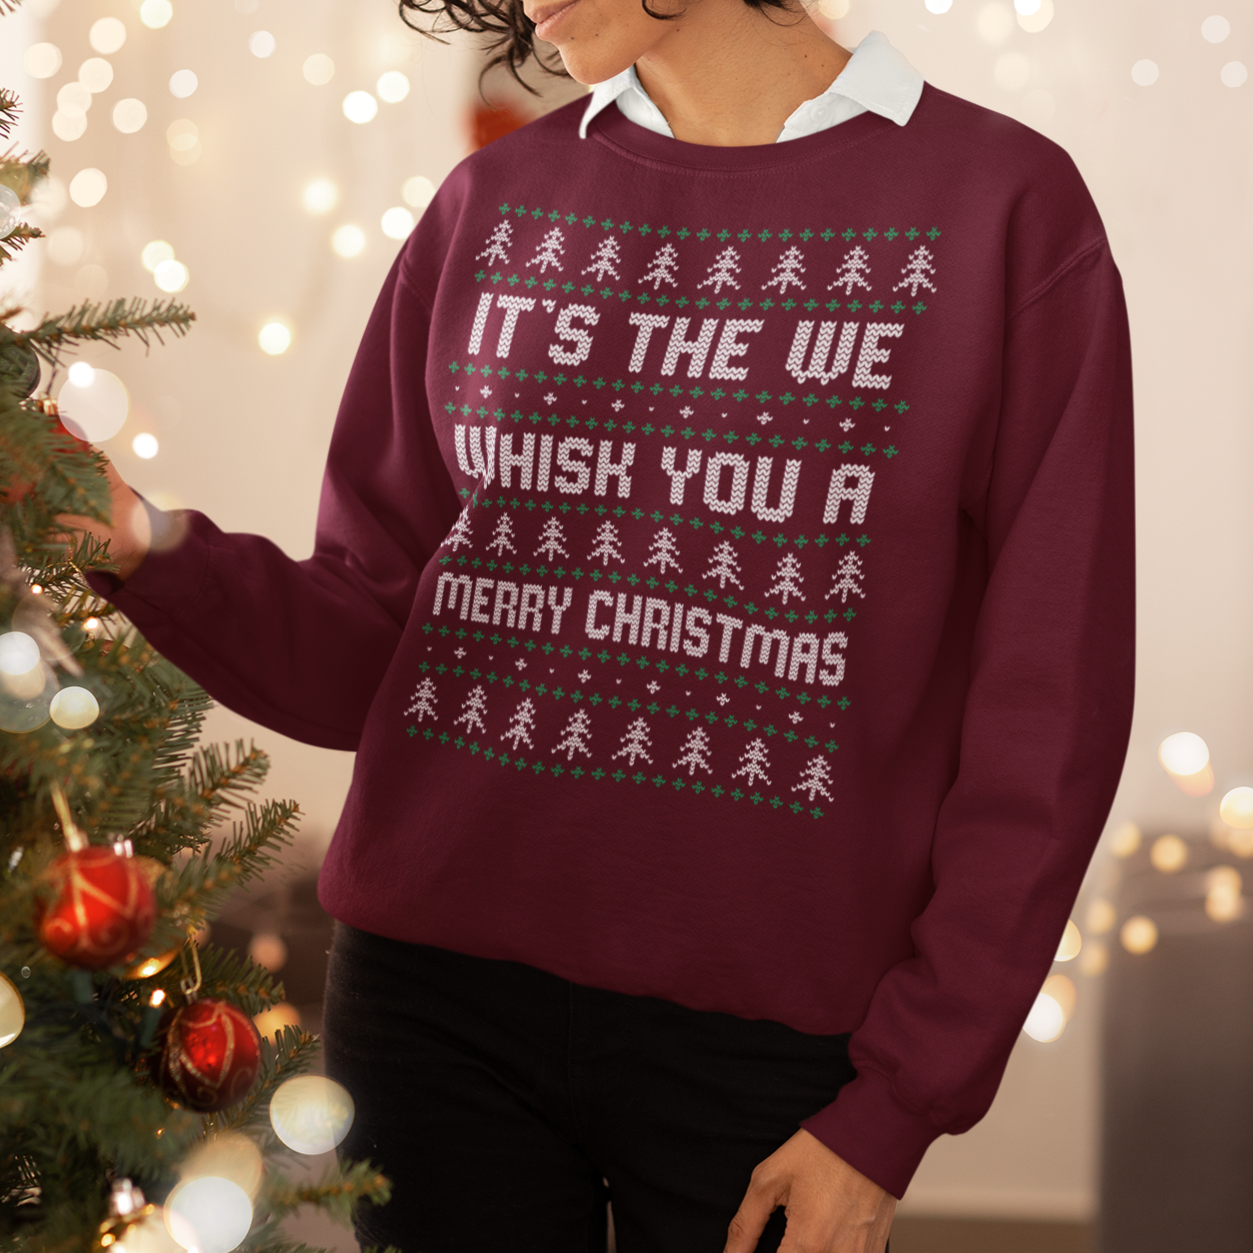 It's The We Whisk You A Merry Christmas - Unisex Ugly Sweater, Christmas, Winter, Fall